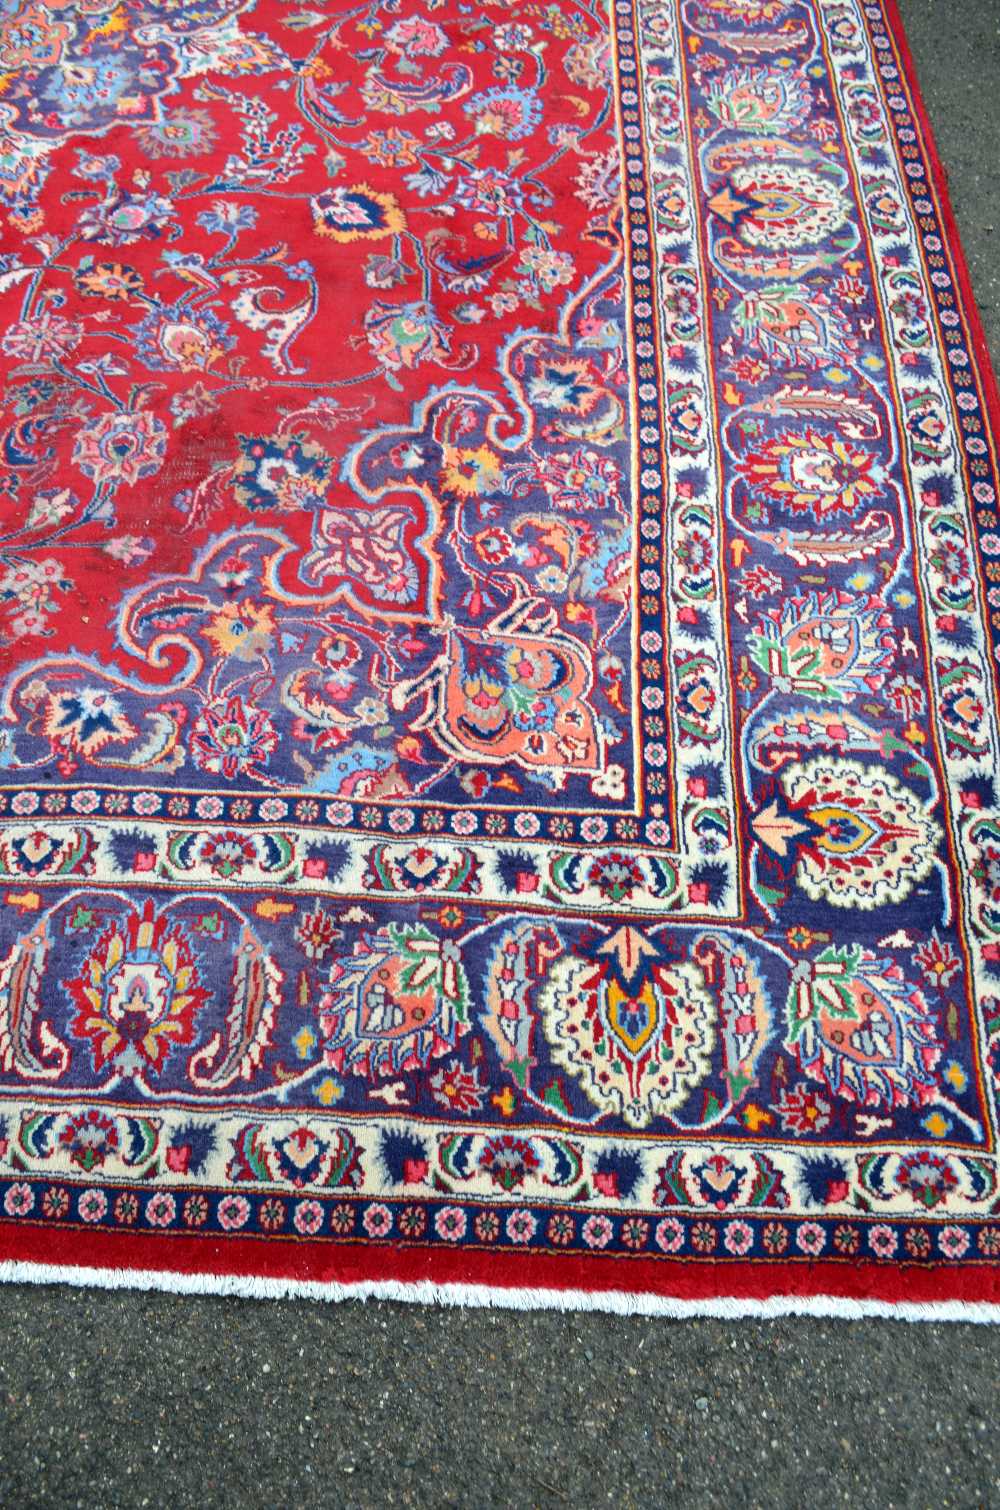 Hand woven persian Tabriz carpet, 100% wool, with multi-coloured design - Image 3 of 7